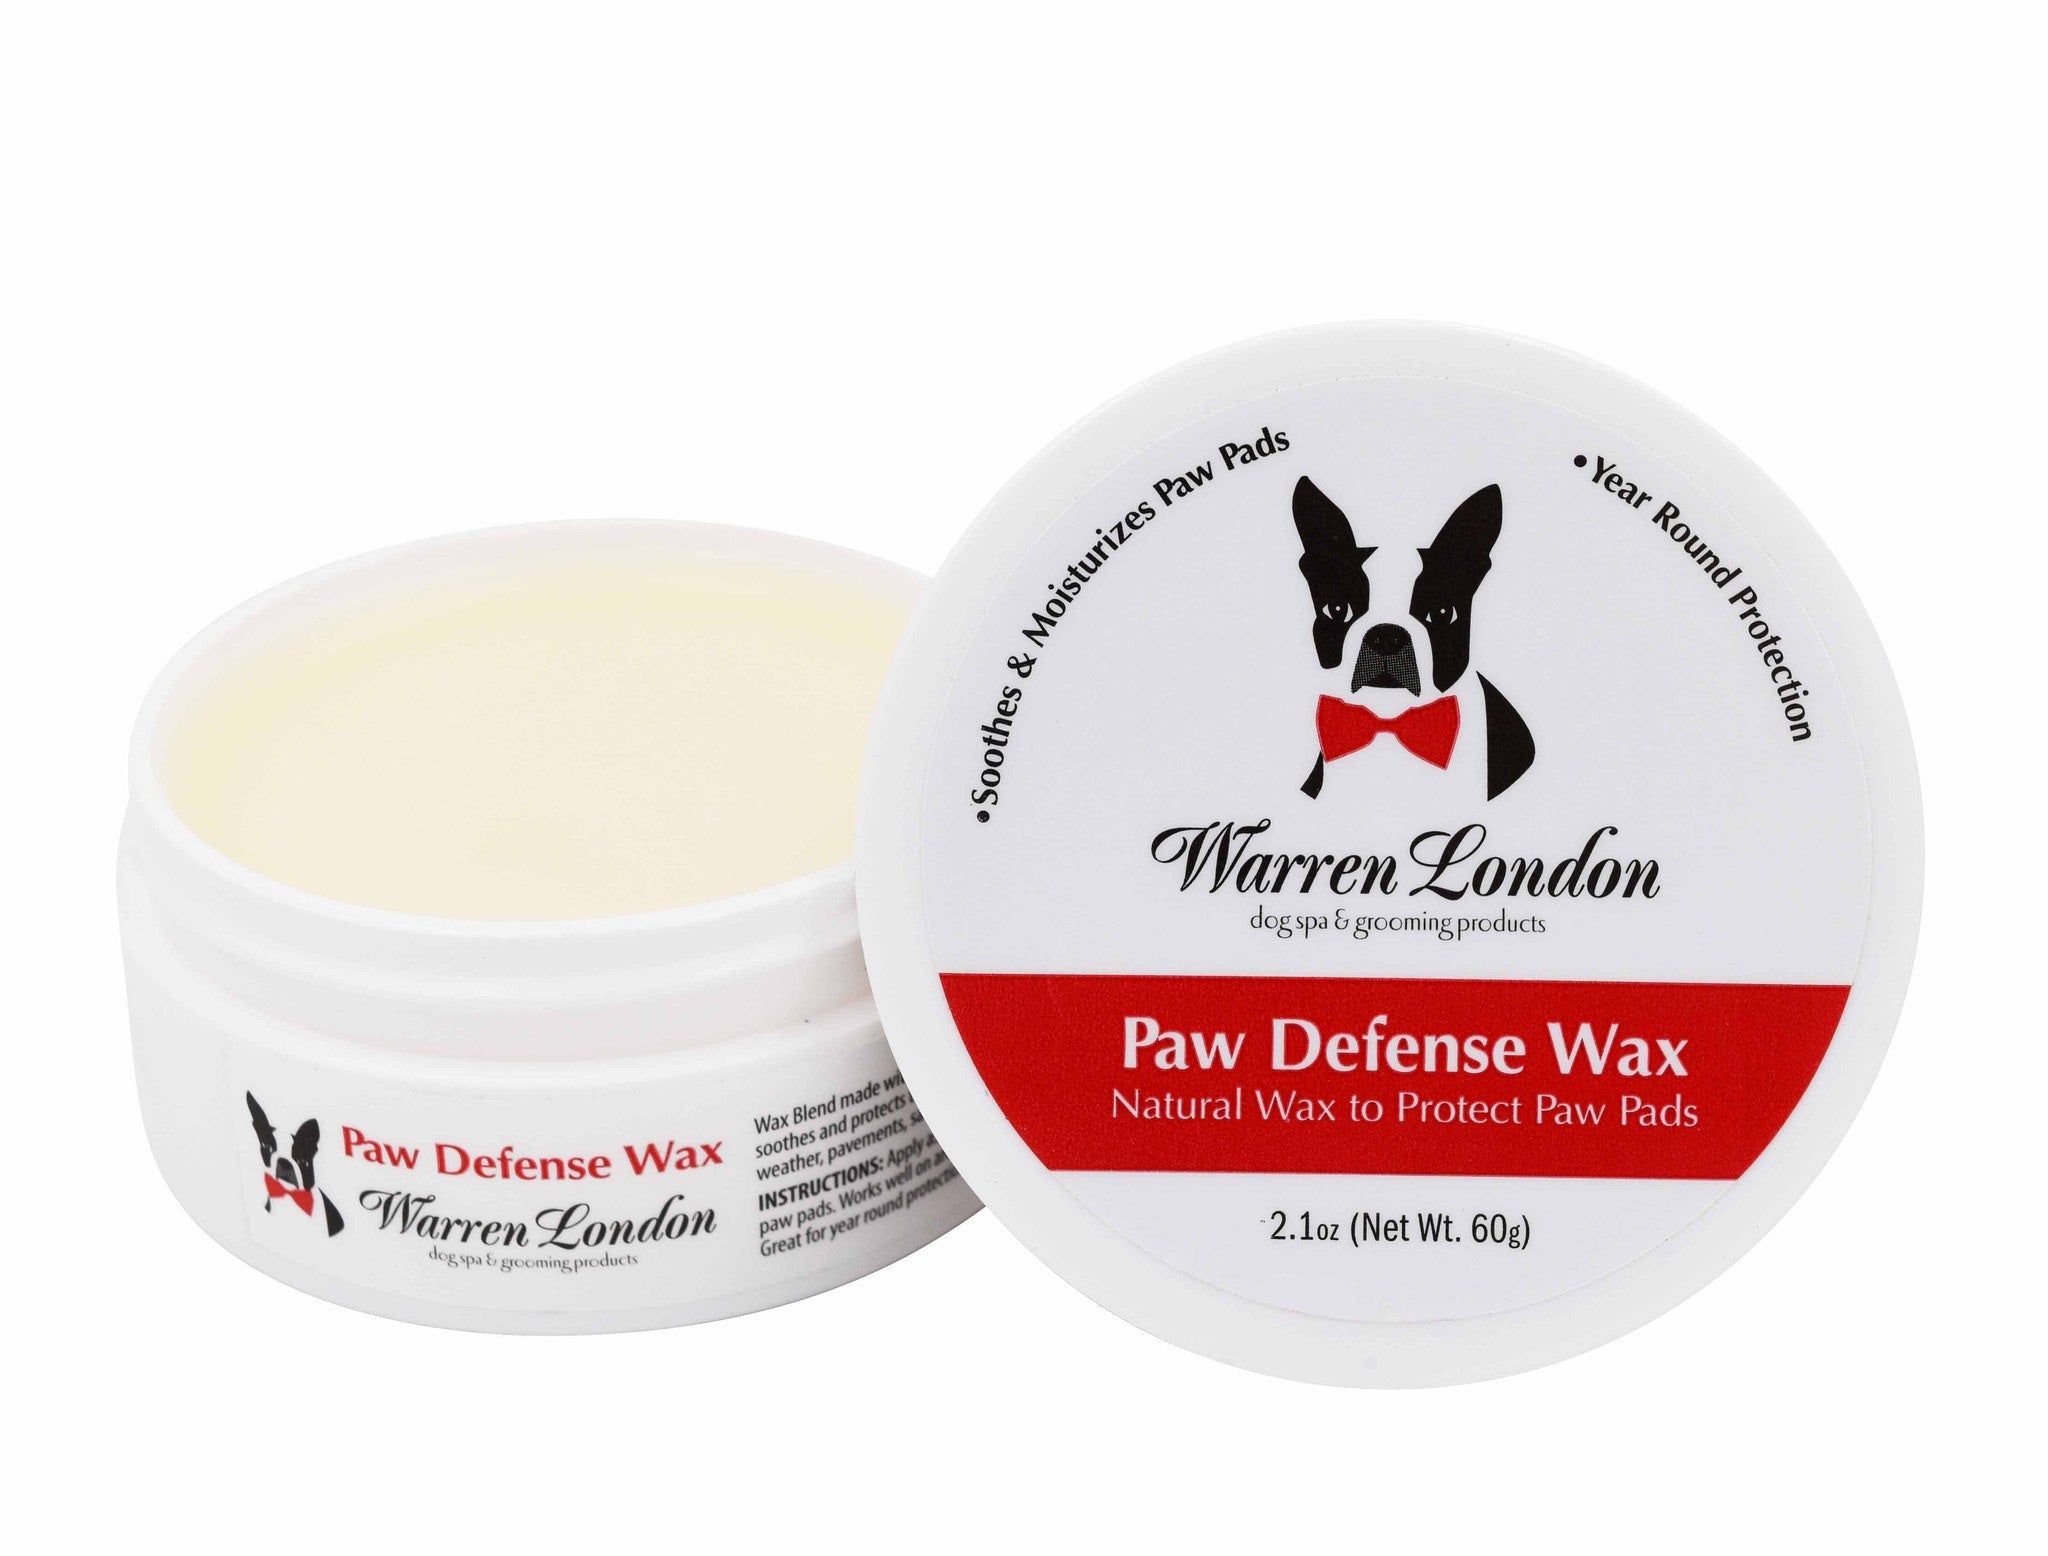 Paw Defense Wax - Soothes, Moisturizes and Protects Dog's Paw Pads Spa Product Warren London 